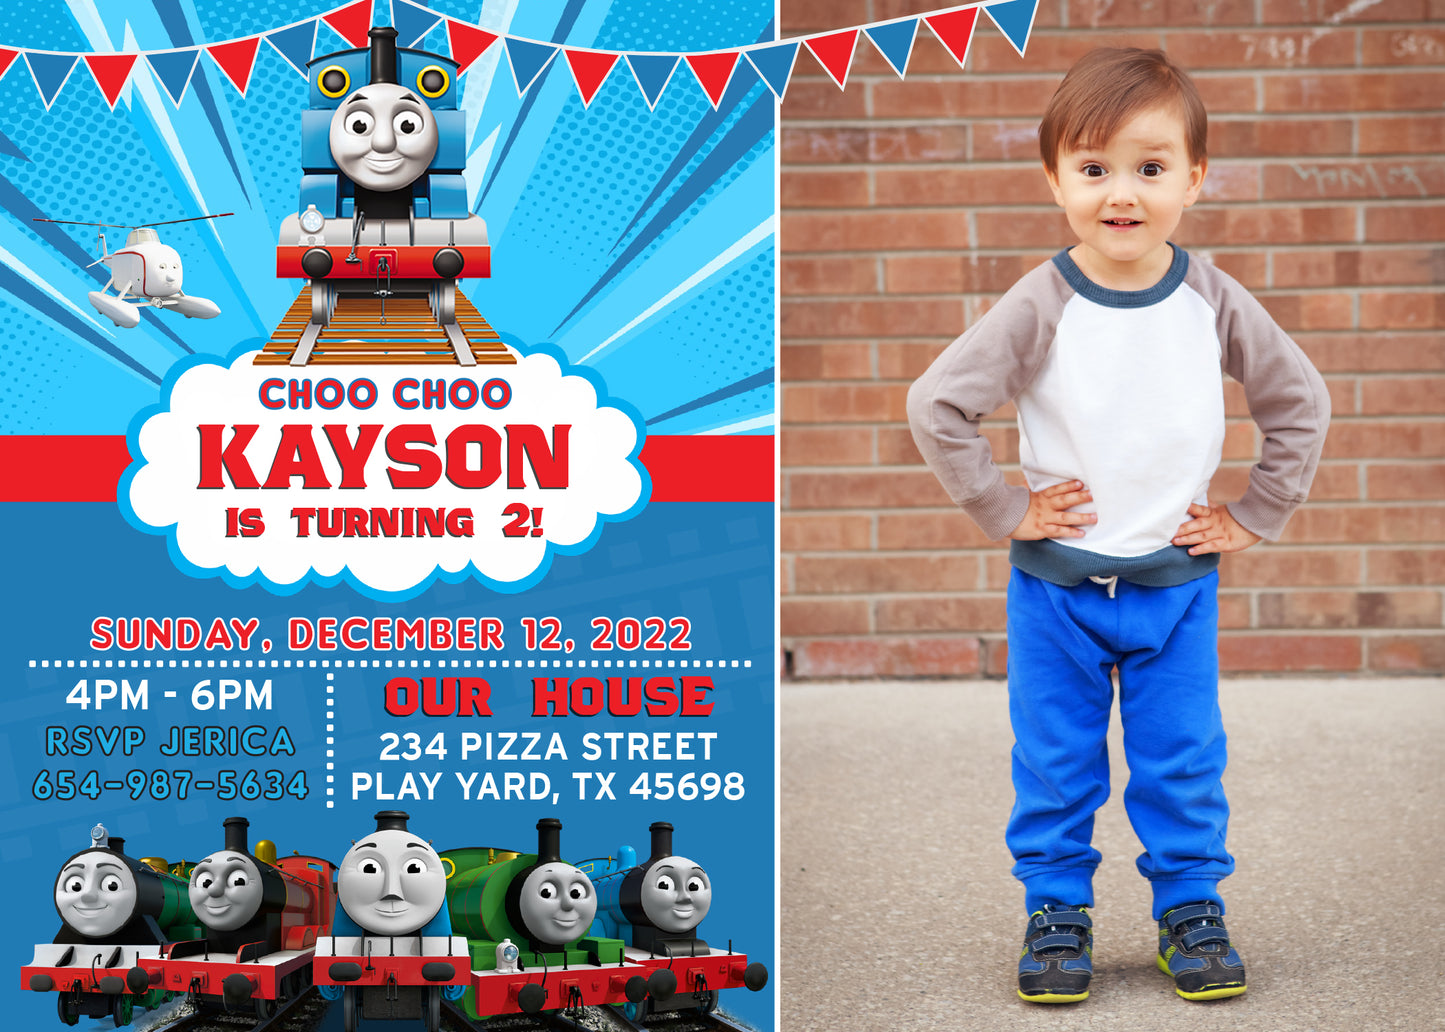 THOMAS THE TRAIN Birthday Party Invitation with or without Photo - Printed or Digital File!